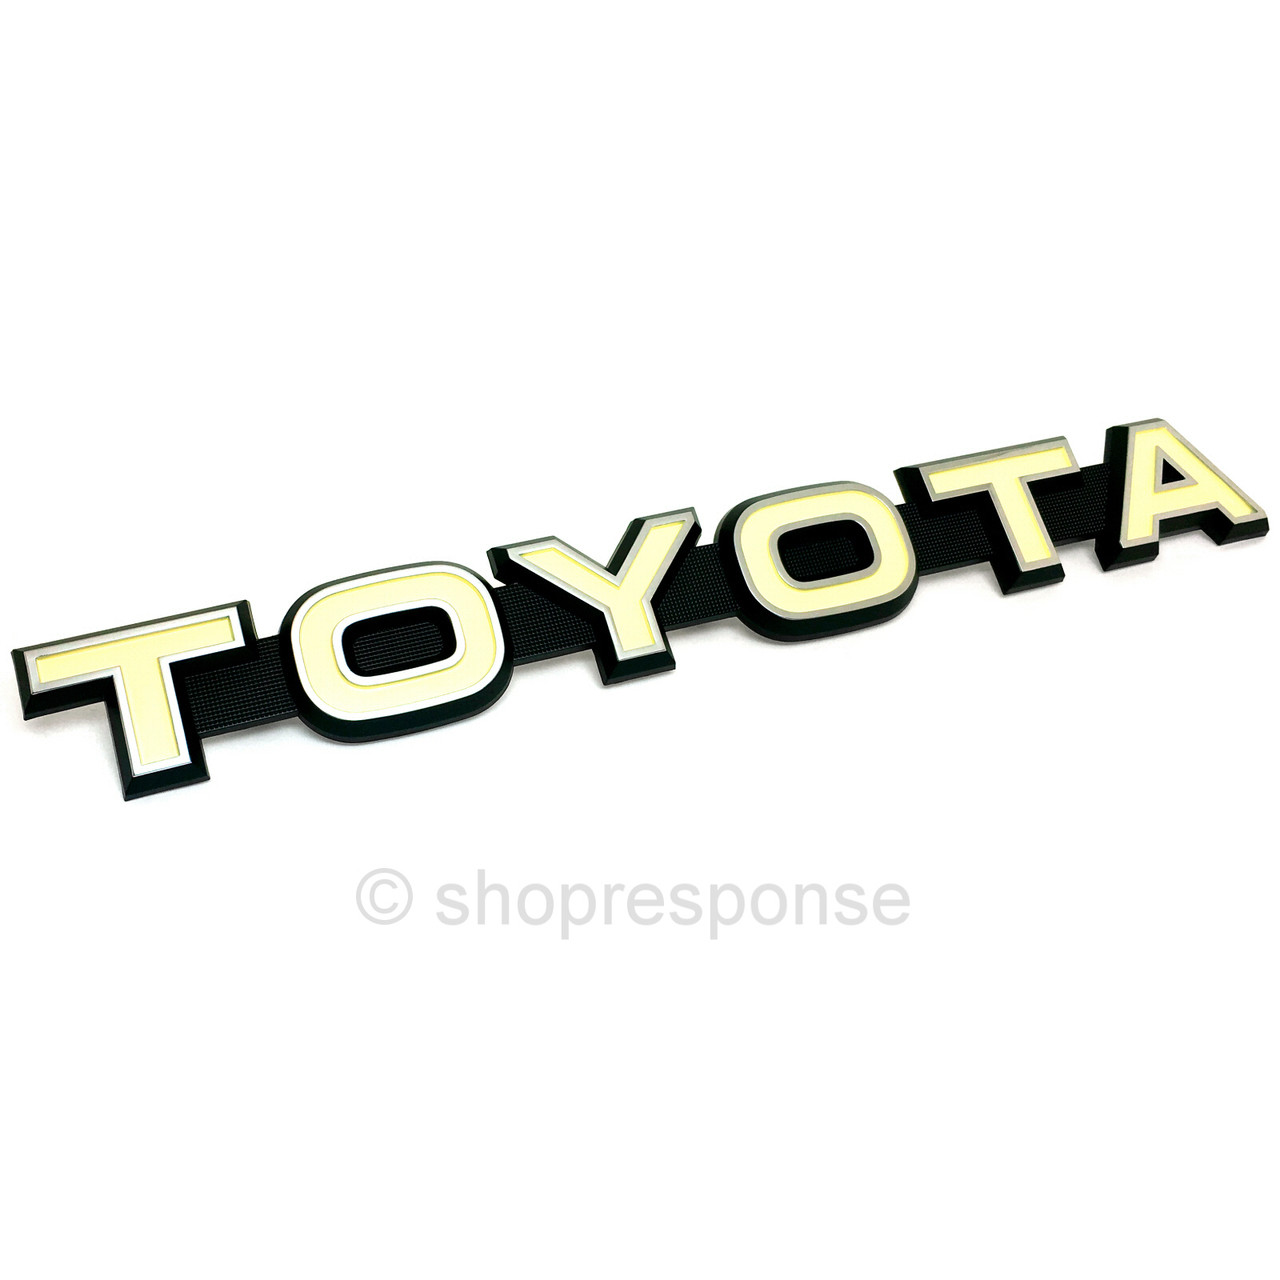 Toyota Fortuner SUV Rear Trunk Emblem Badge Tailgate Fragile Sticker Logo  Decal From Gzchangsen, $13.02 | DHgate.Com